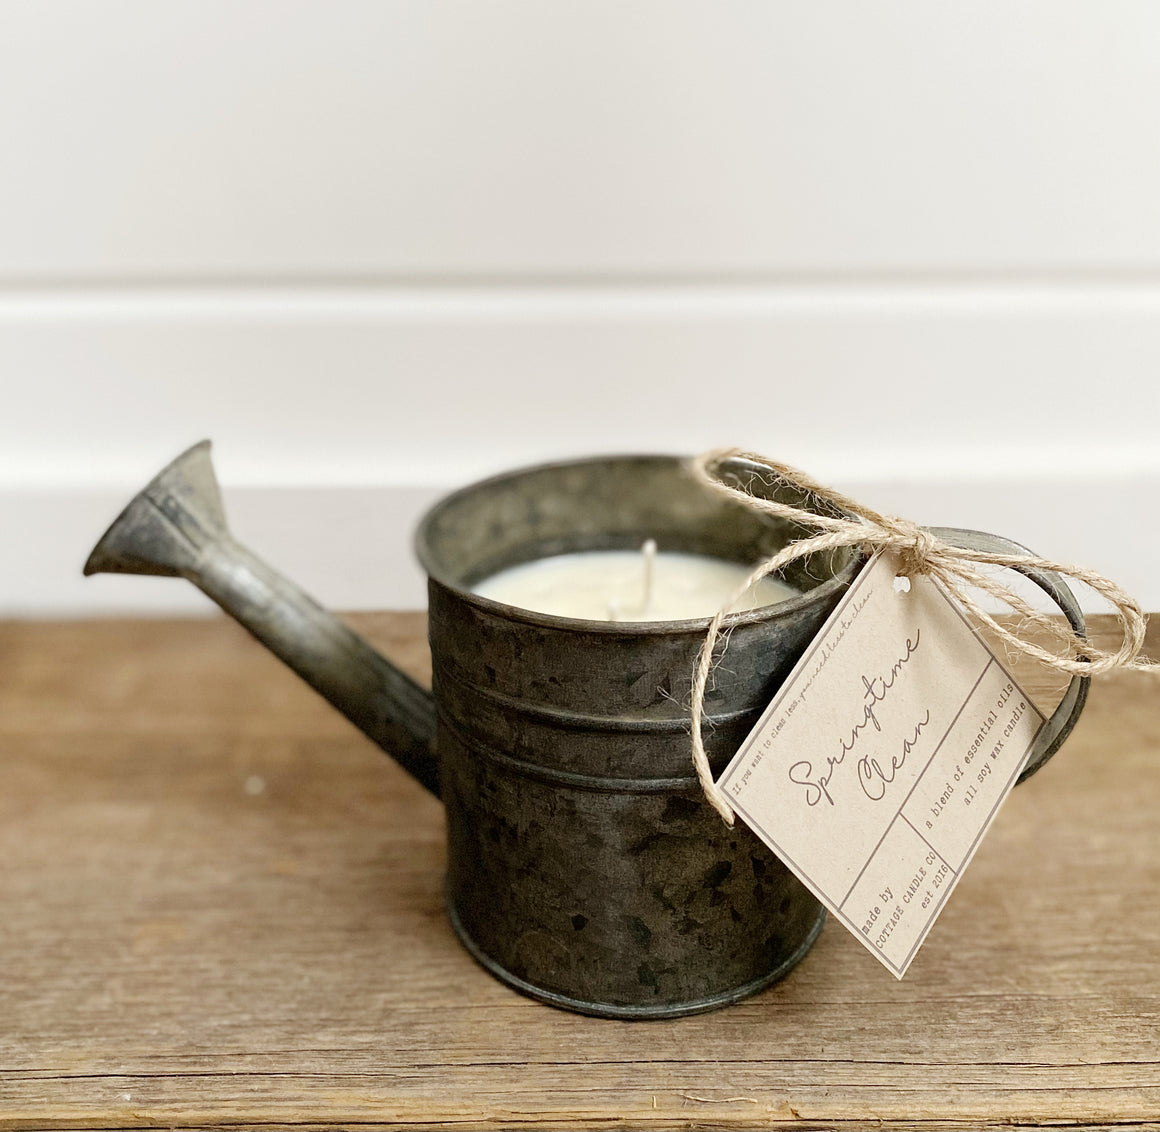 **NEW** GALVANIZED WATERING CAN - CHOOSE YOUR FAVORITE SCENT